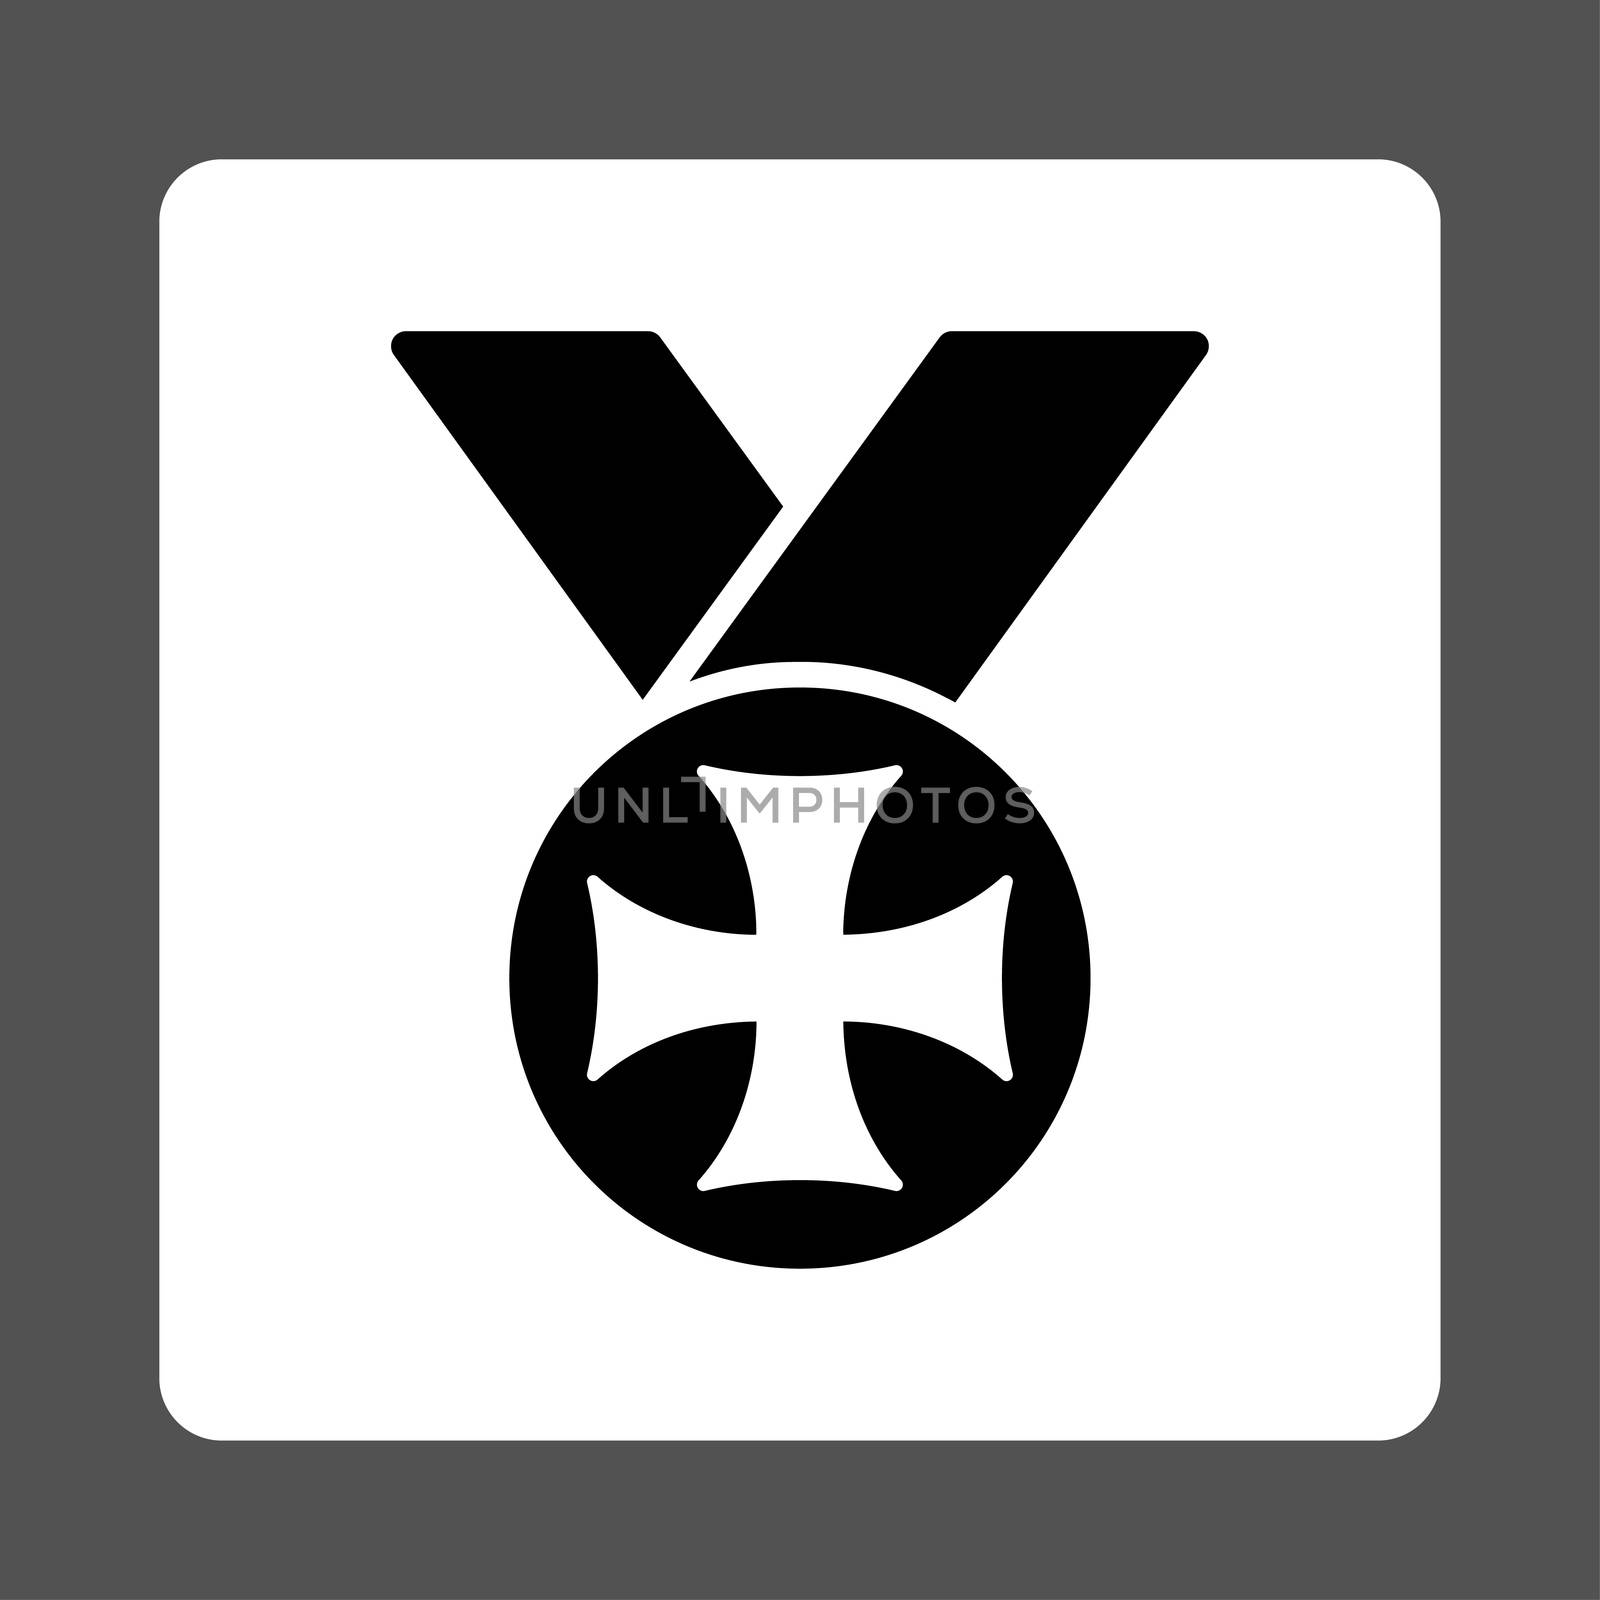 Maltese medal icon from Award Buttons OverColor Set. Icon style is black and white colors, flat rounded square button, gray background.